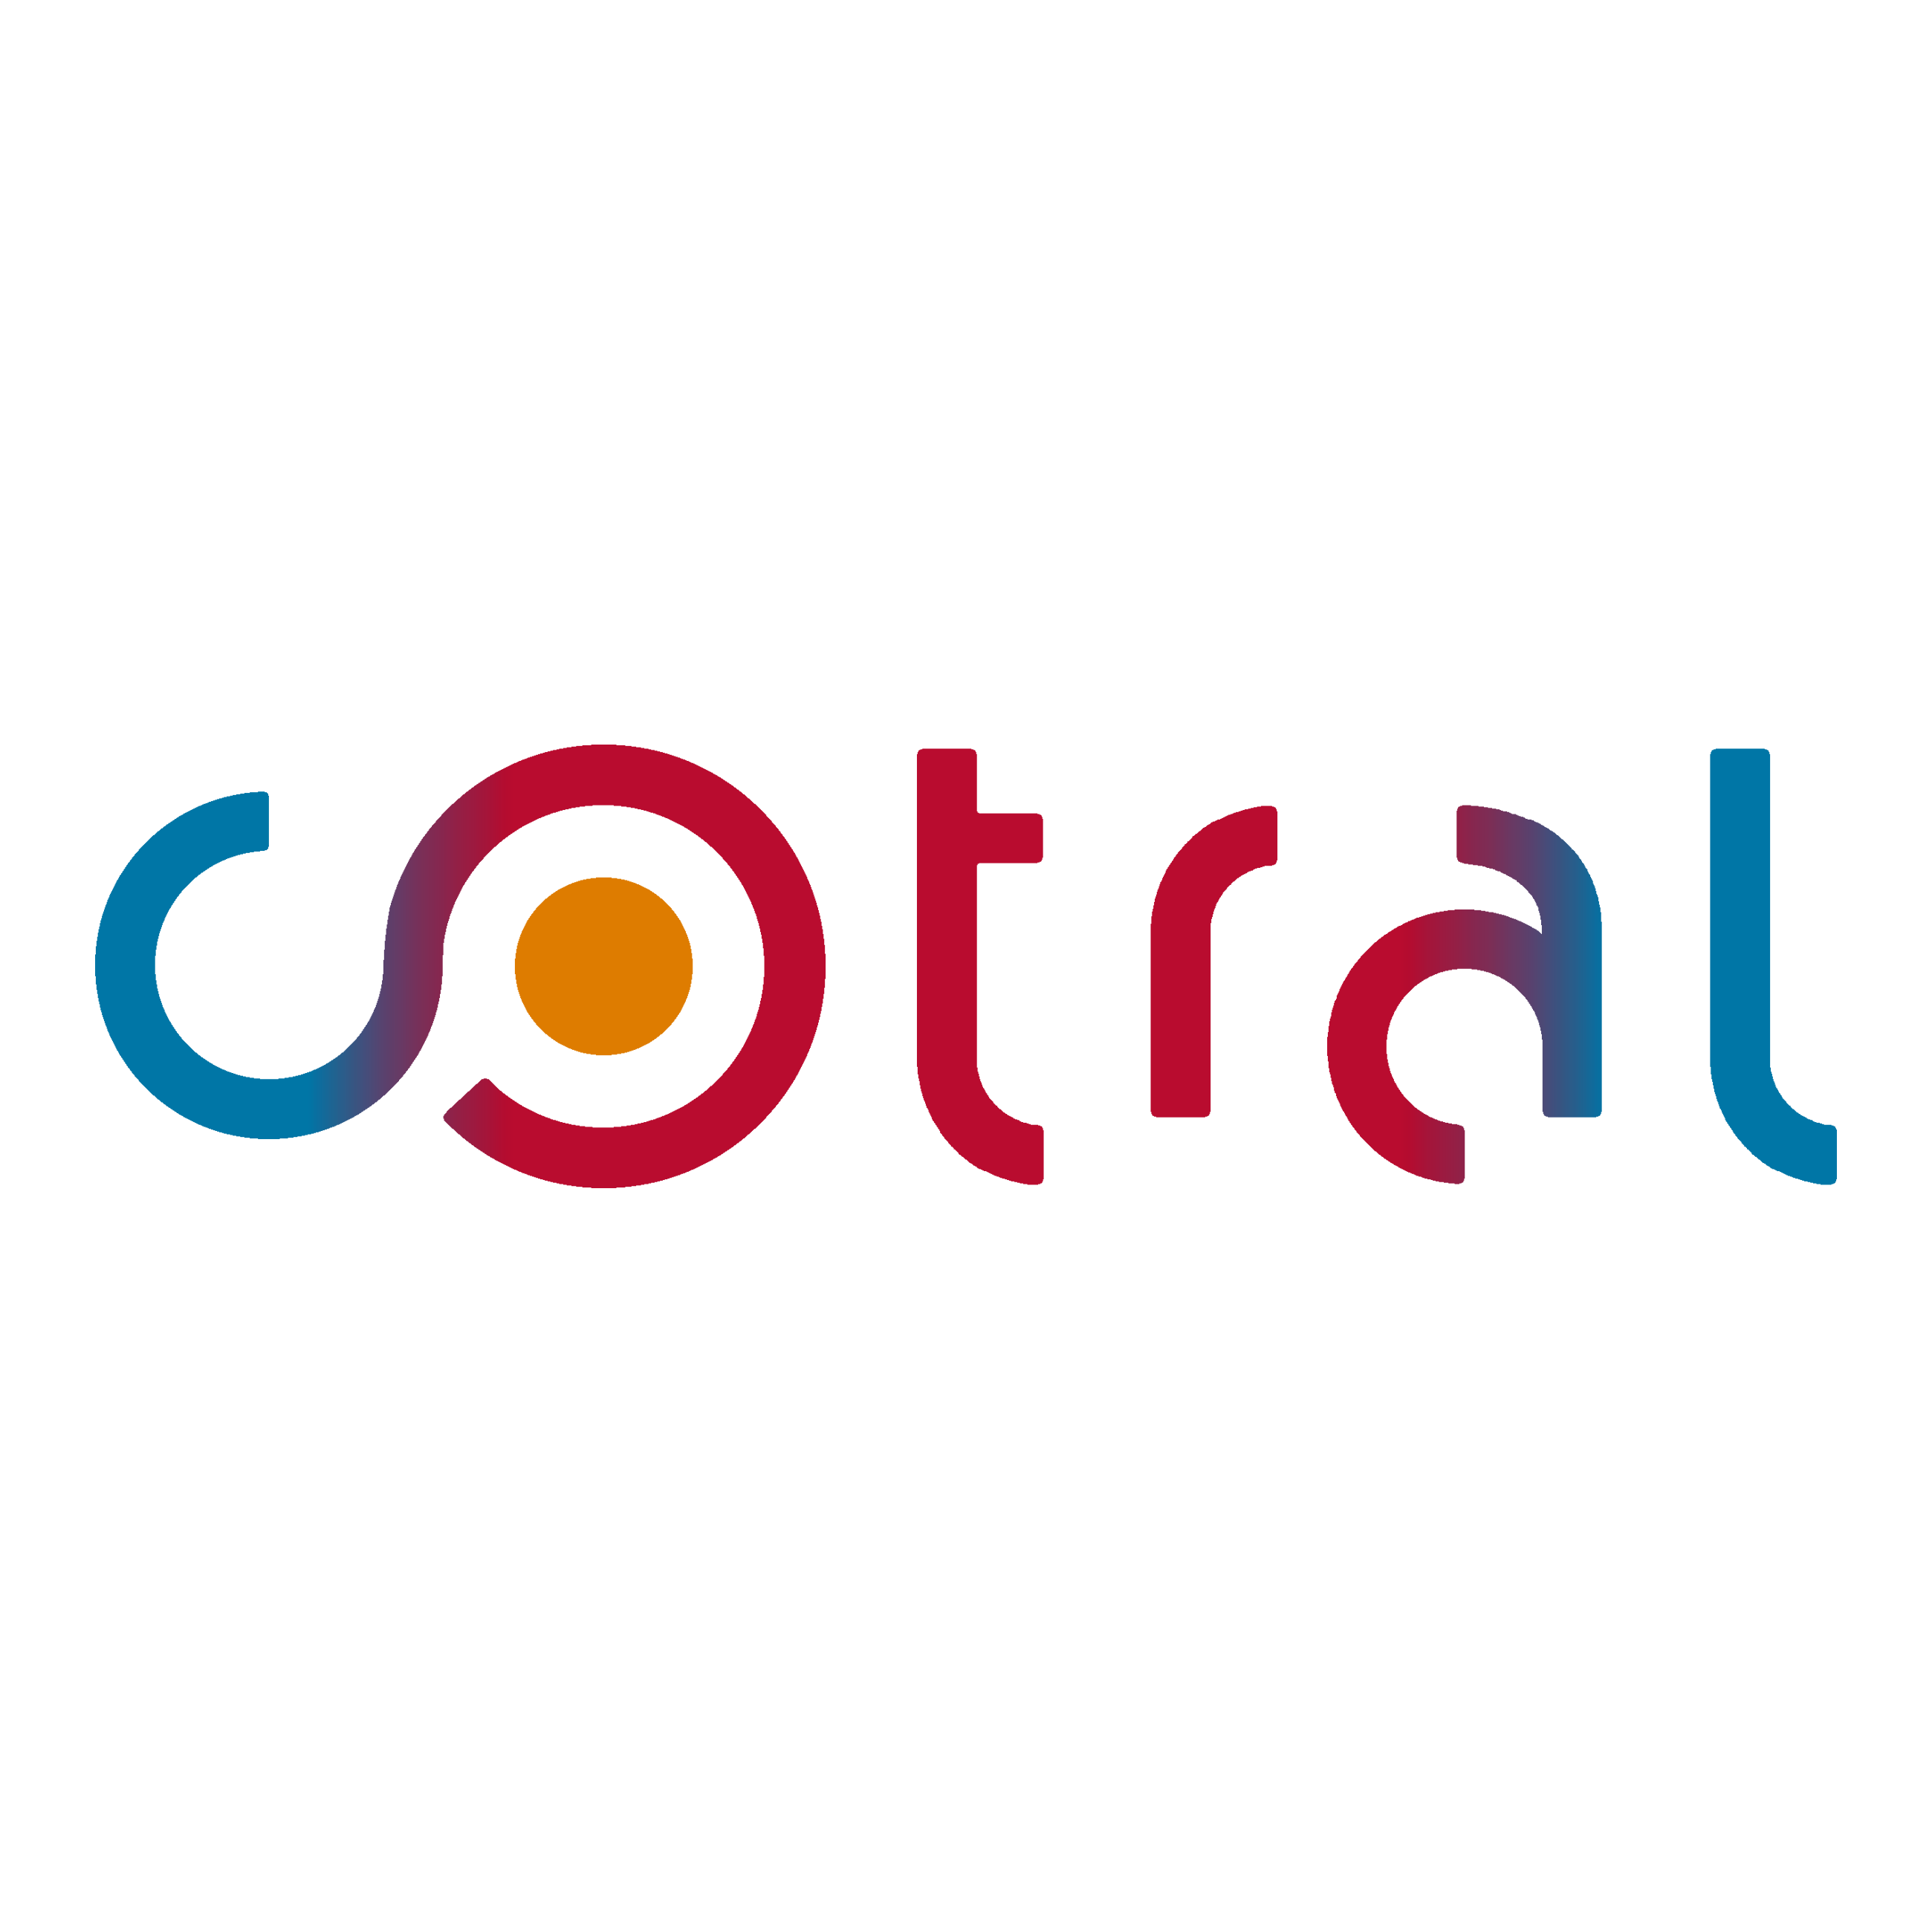 Cotral